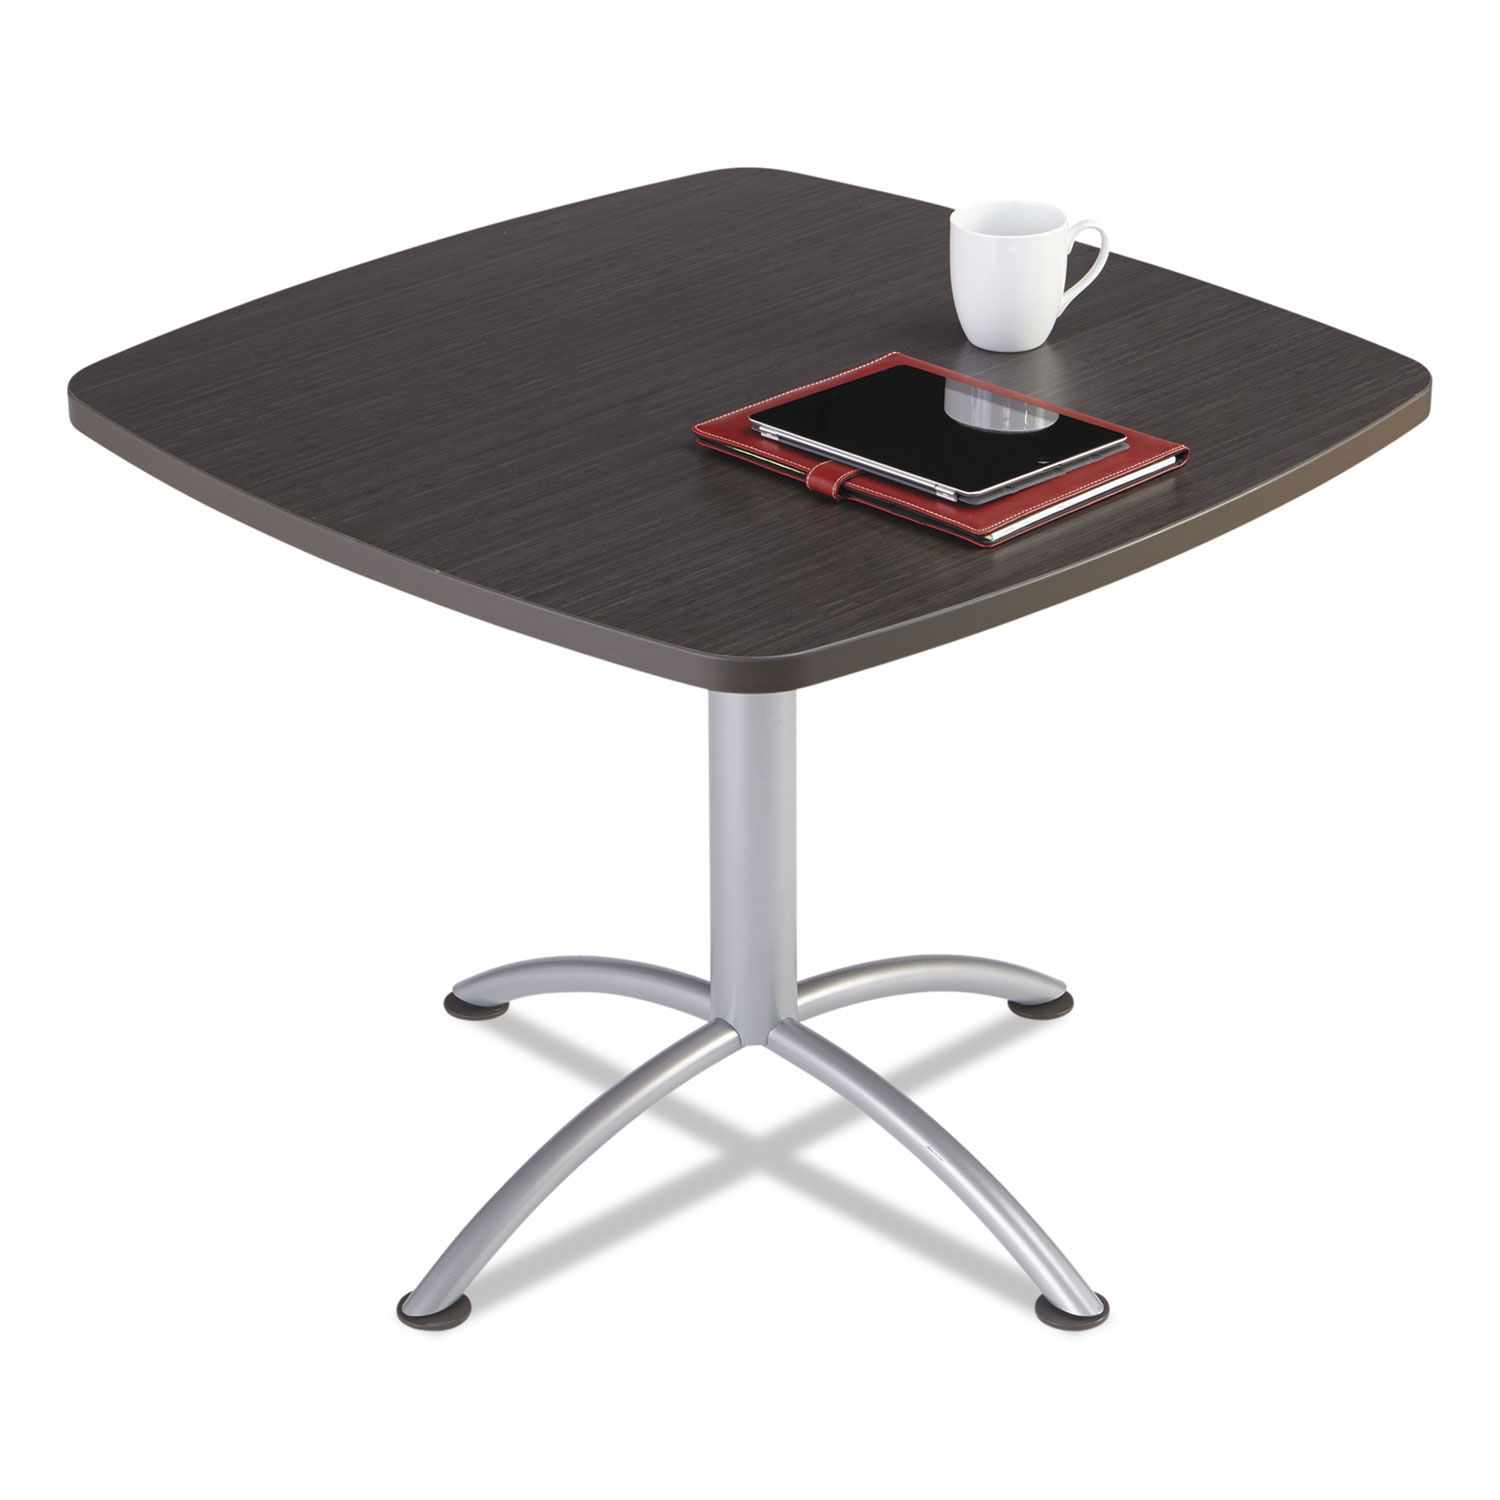 iLand Table Cafe-Height, Square Top, Contoured Edges, 36w x 36d x 29h, Gray Walnut/Silver